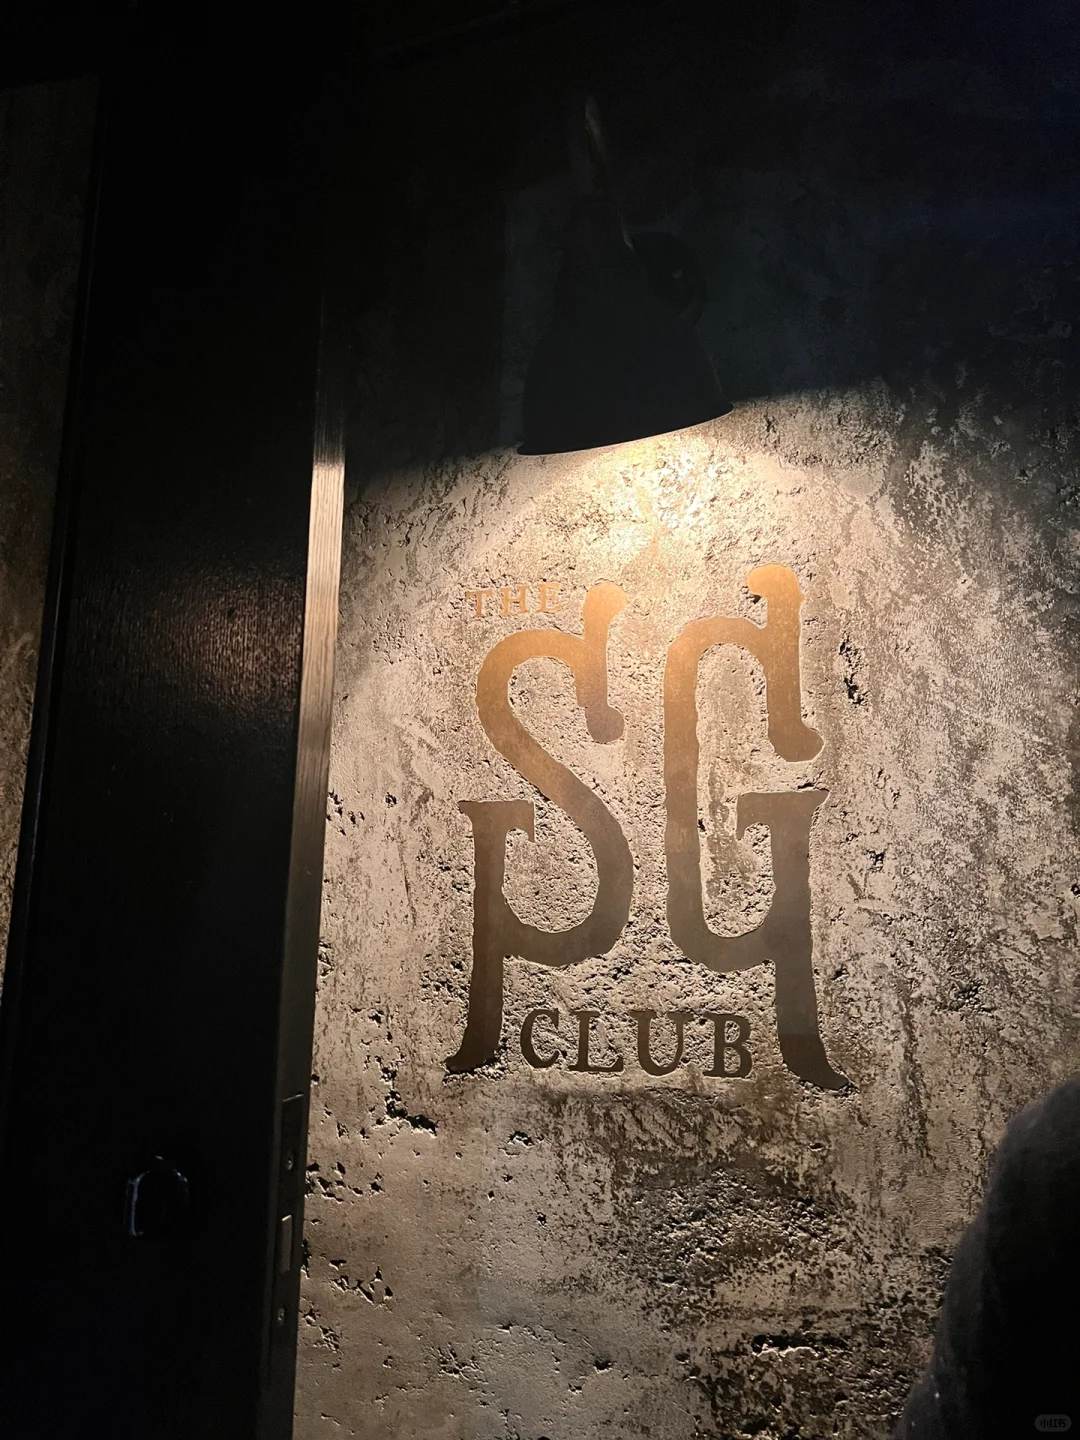 Tokyo-Shibuya THE SG Club is a top bar in Japan and one of the top 50 bars in Asia.